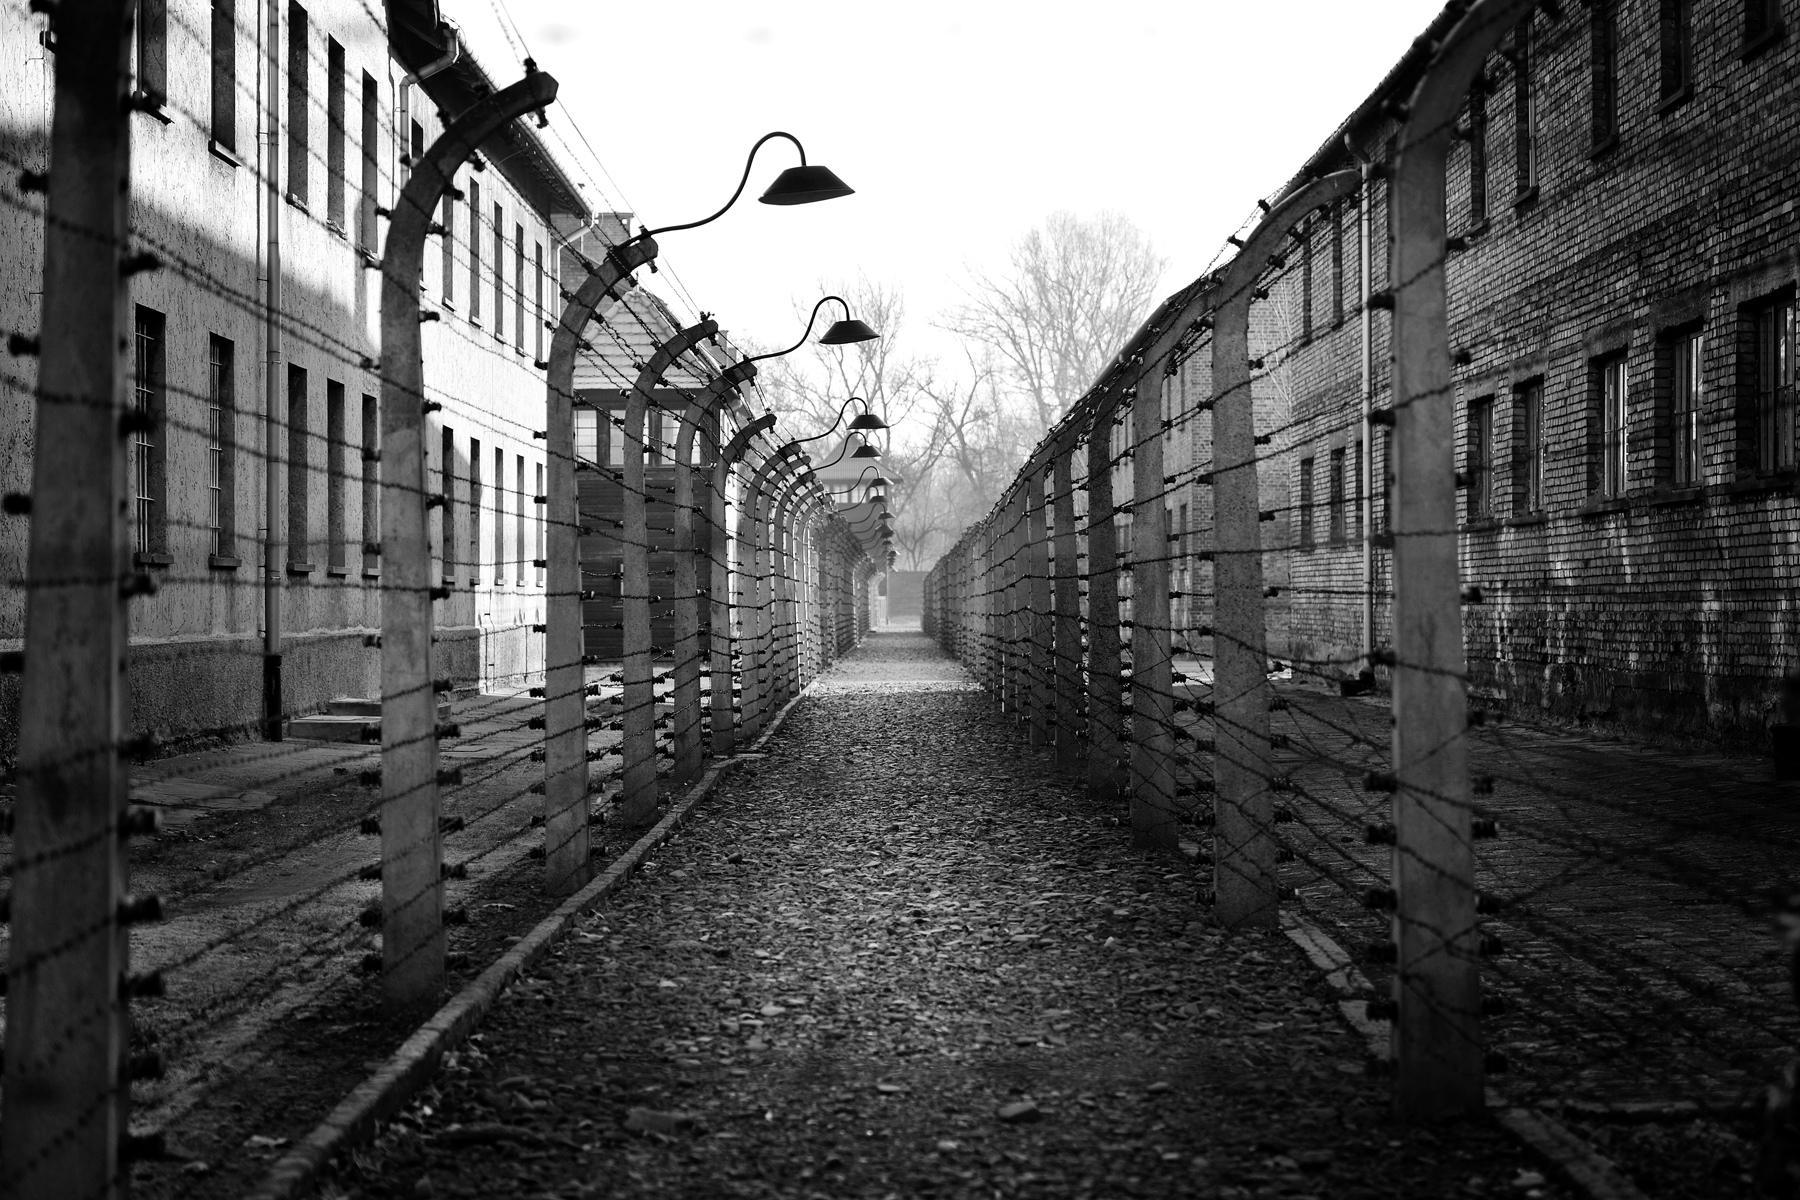 Today Prime Minister David Cameron visited the former concentration camp Auschwitz-Birkenau in Poland.  The PM visited the site to pay his respect for all those that lost their lives. Auschwitz concentration camp was a network of German Nazi concentration camps and extermination camps built and operated by the Third Reich in Polish areas annexed by Nazi Germany during World War II